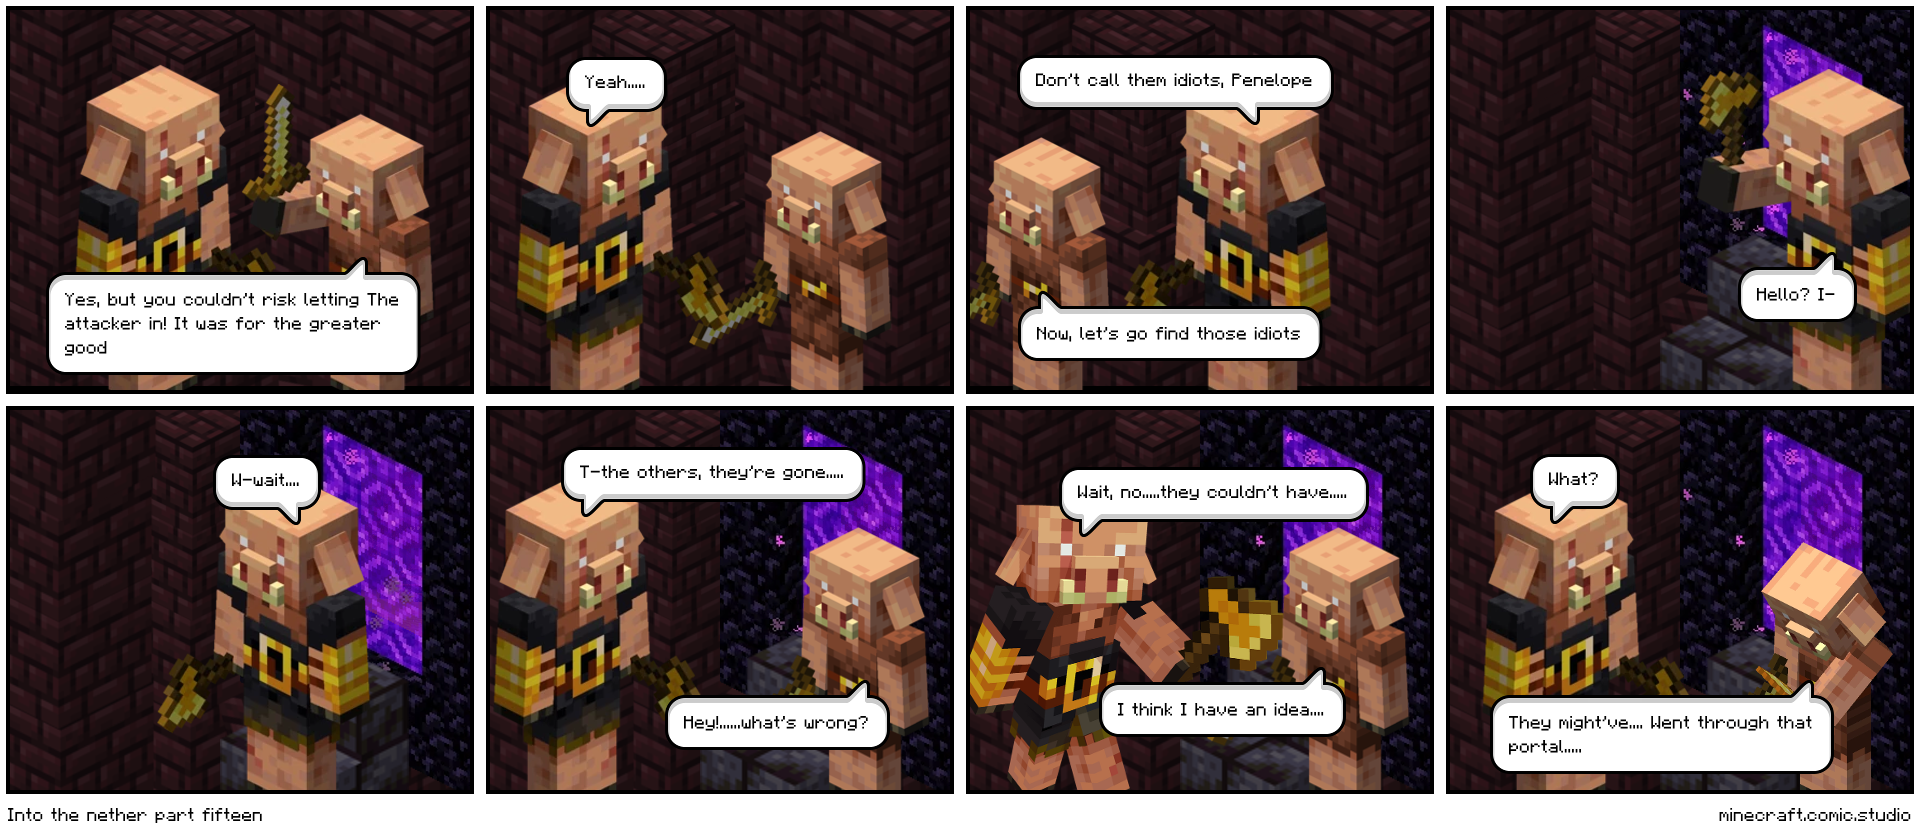 Into the nether part fifteen